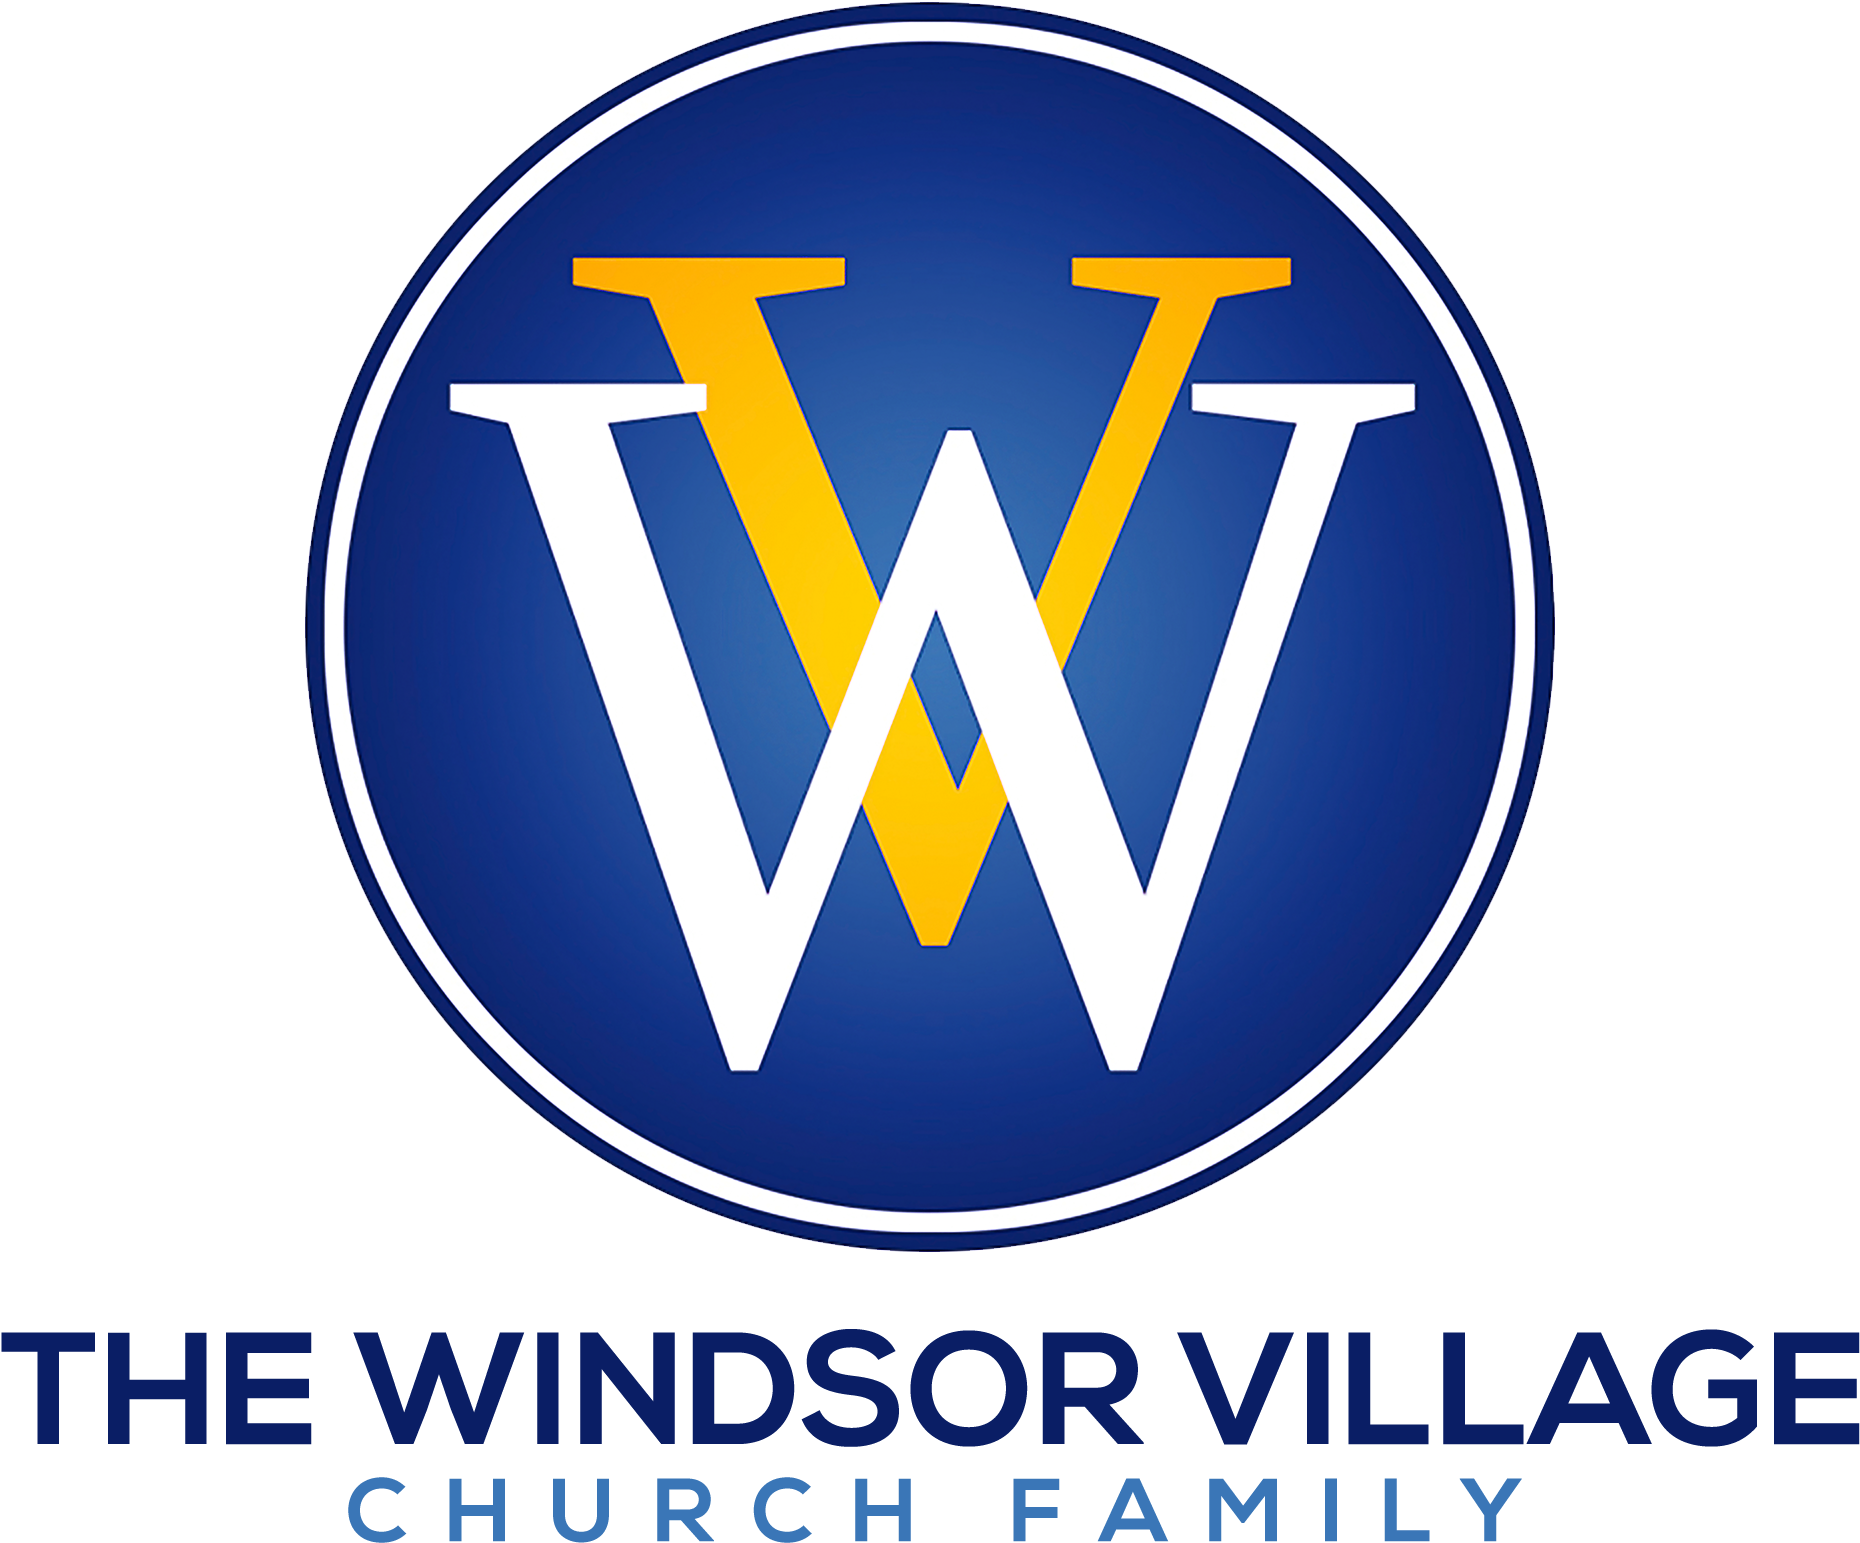 If You Would Like For Your Church To Become An M3 Conference - The Windsor Village Church Family (2000x2000)